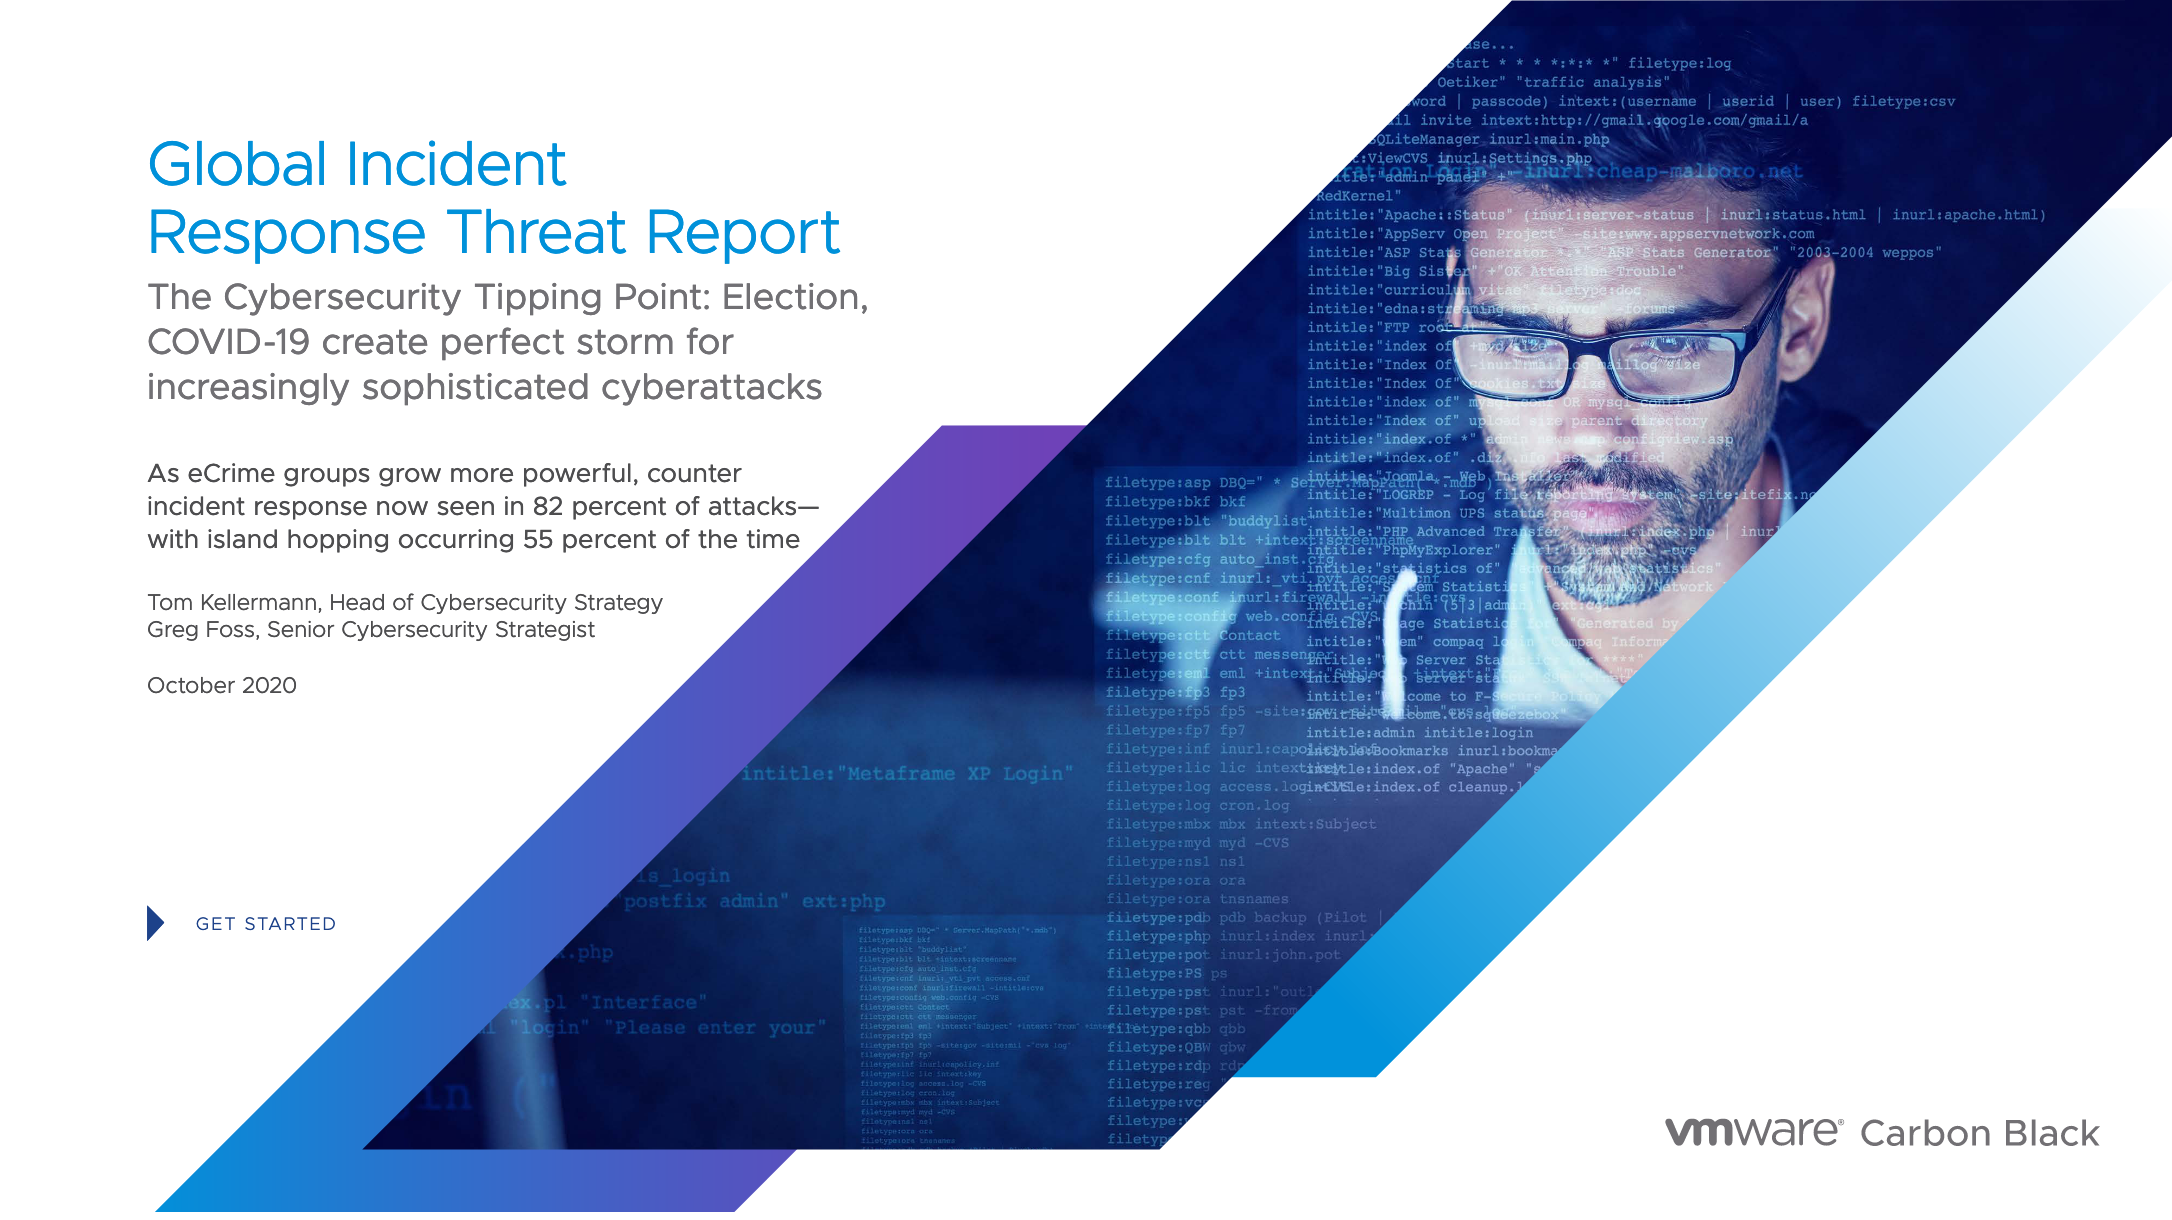 Screenshot 2020 11 03 VMWCB Report Global Incident Response Threat Report The Cybersecurity Tipping Point pdf - Global Incident Response Threat Report: The Cybersecurity Tipping Point Election, COVID-19 create perfect storm for increasingly sophisticated cyberattacks